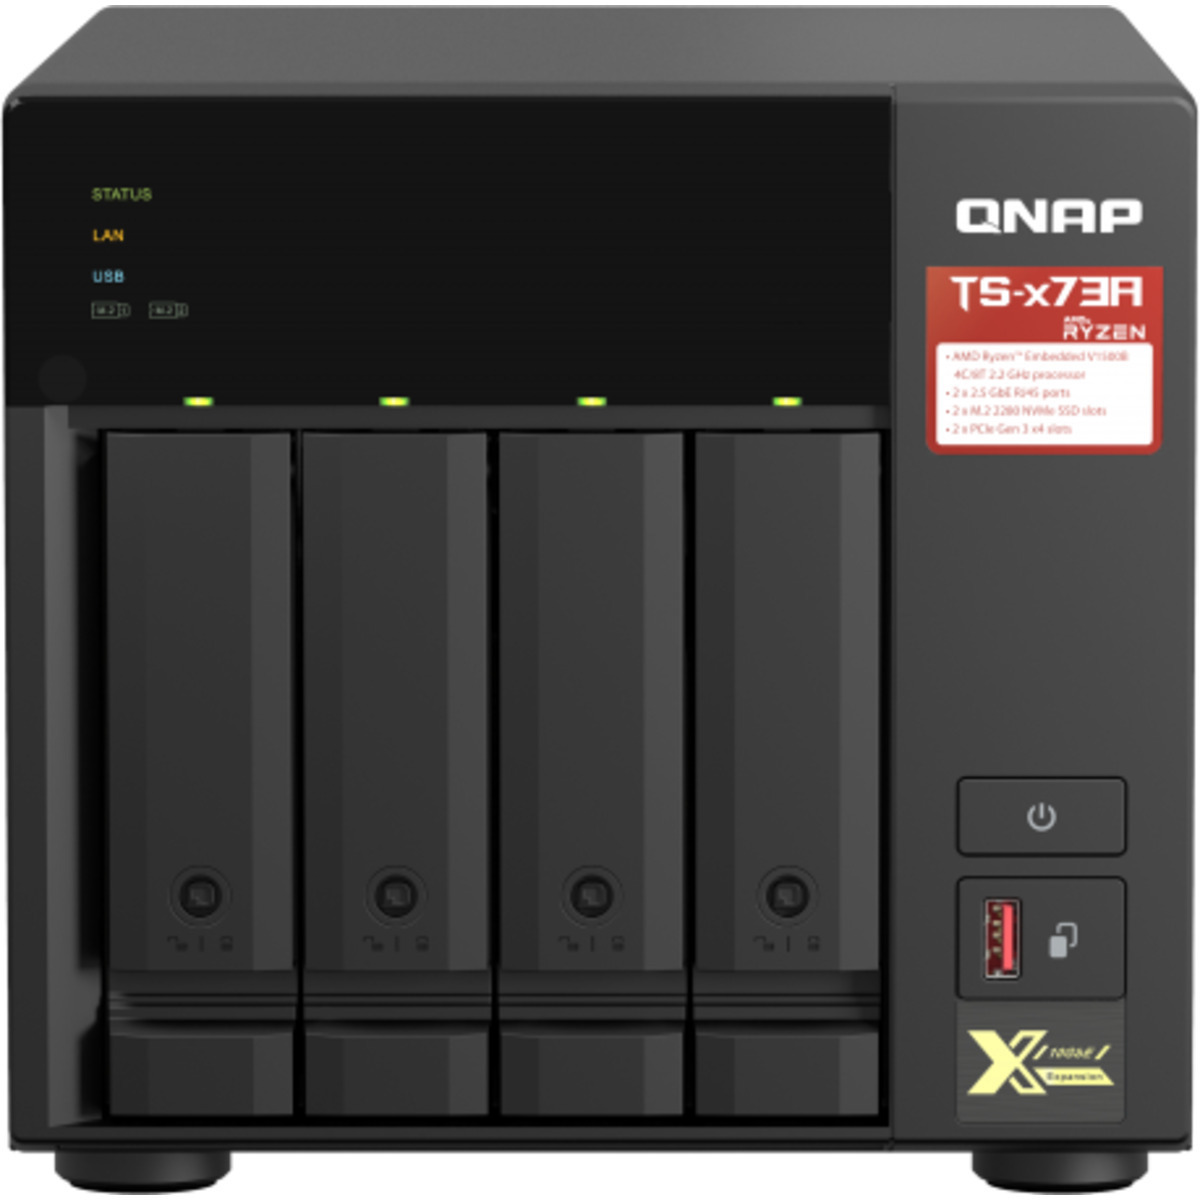 buy $1317 QNAP TS-473A 16tb Desktop NAS - Network Attached Storage Device 4x4000gb Western Digital Blue WD40EZRZ 3.5 5400rpm SATA 6Gb/s HDD CONSUMER Class Drives Installed - Burn-In Tested - nas headquarters buy network attached storage server device das new raid-5 free shipping usa TS-473A